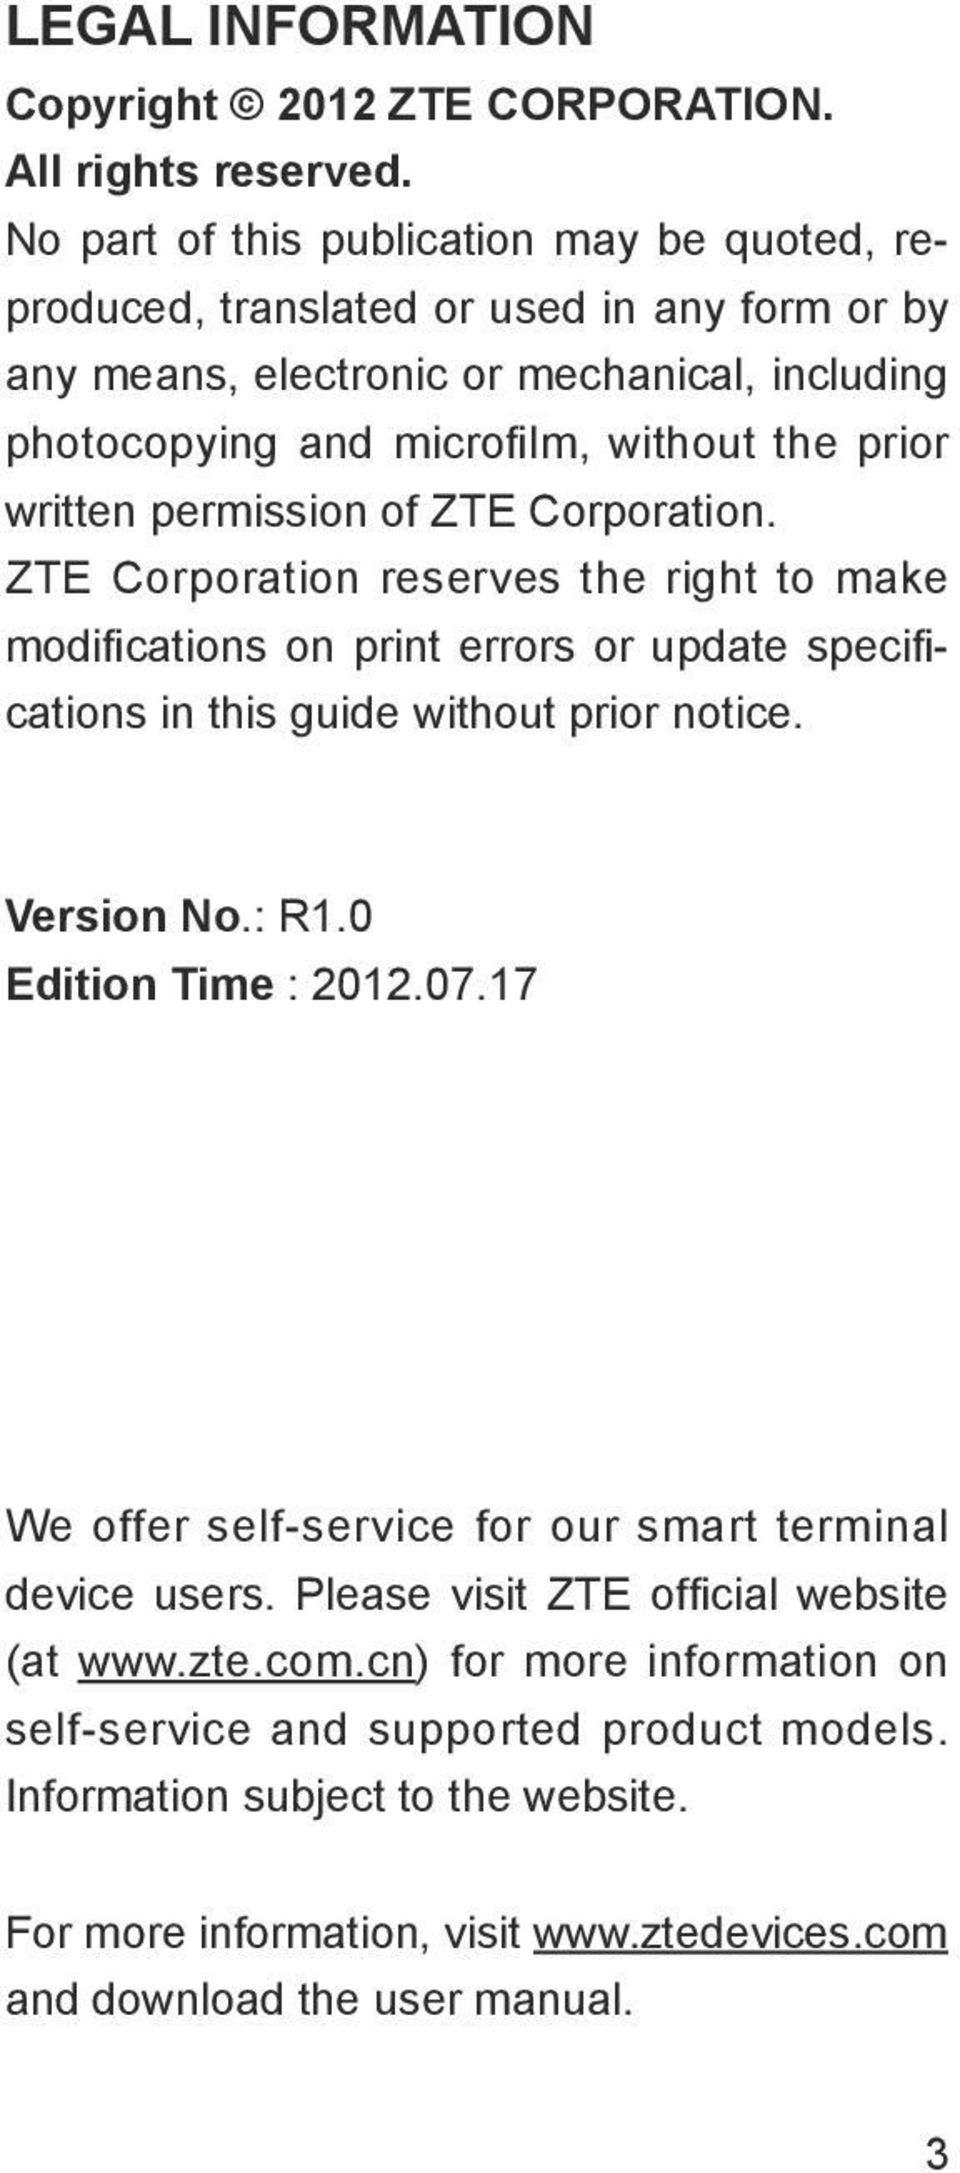 written permission of ZTE Corporation. ZTE Corporation reserves the right to make modifications on print errors or update specifications in this guide without prior notice. Version No.: R1.